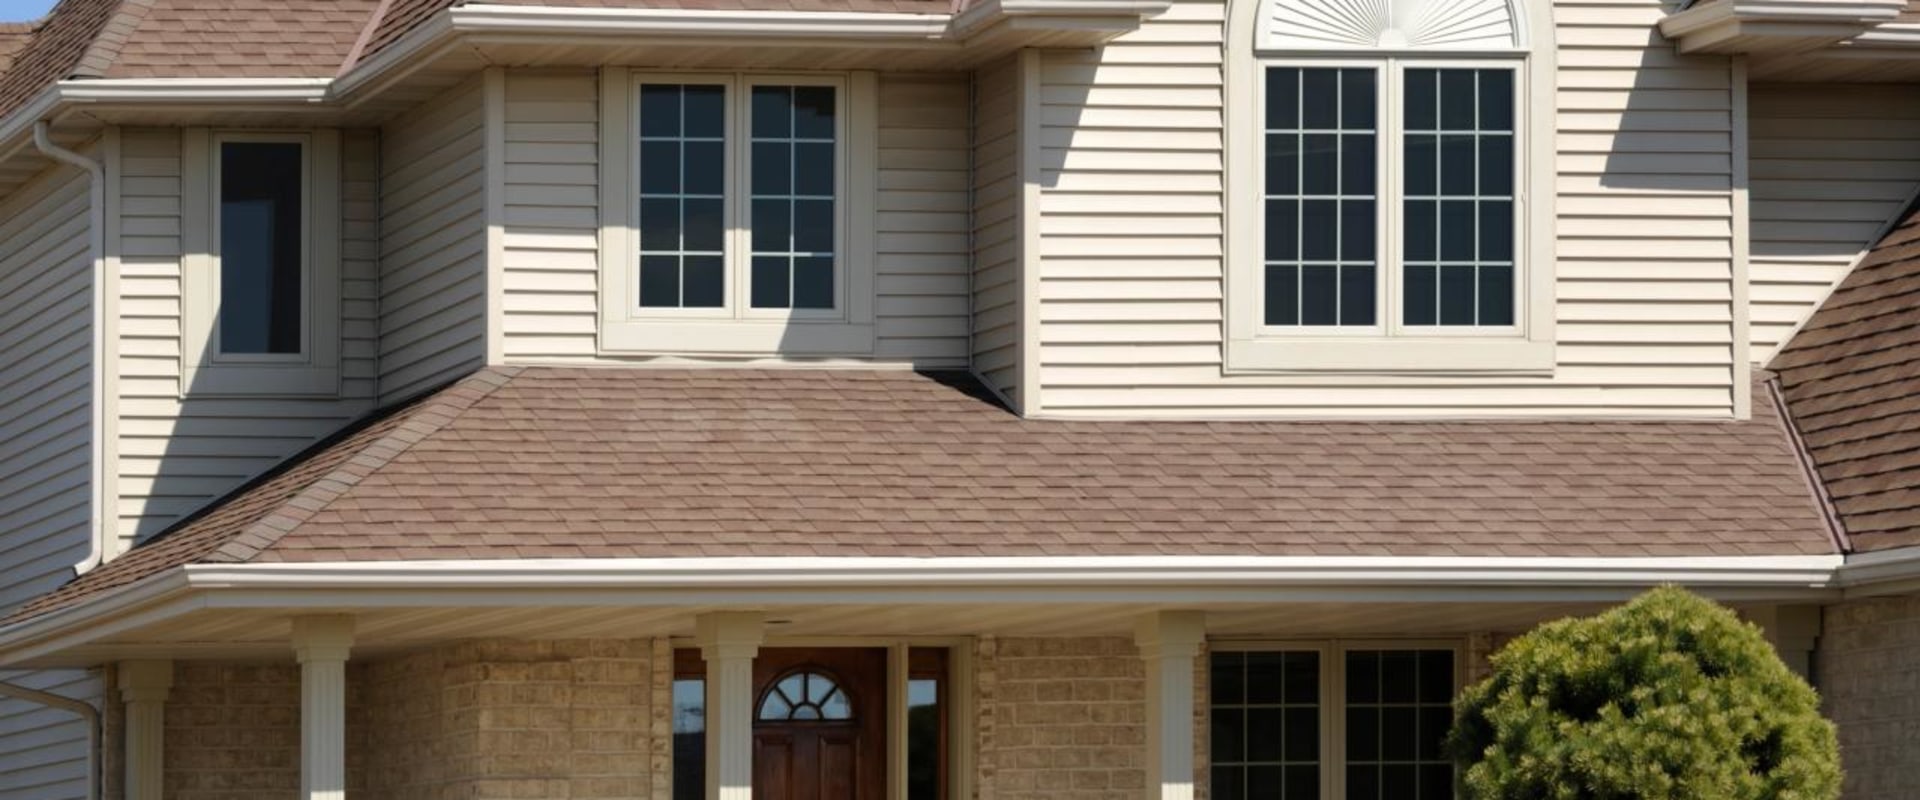 What is the most common roofing material?